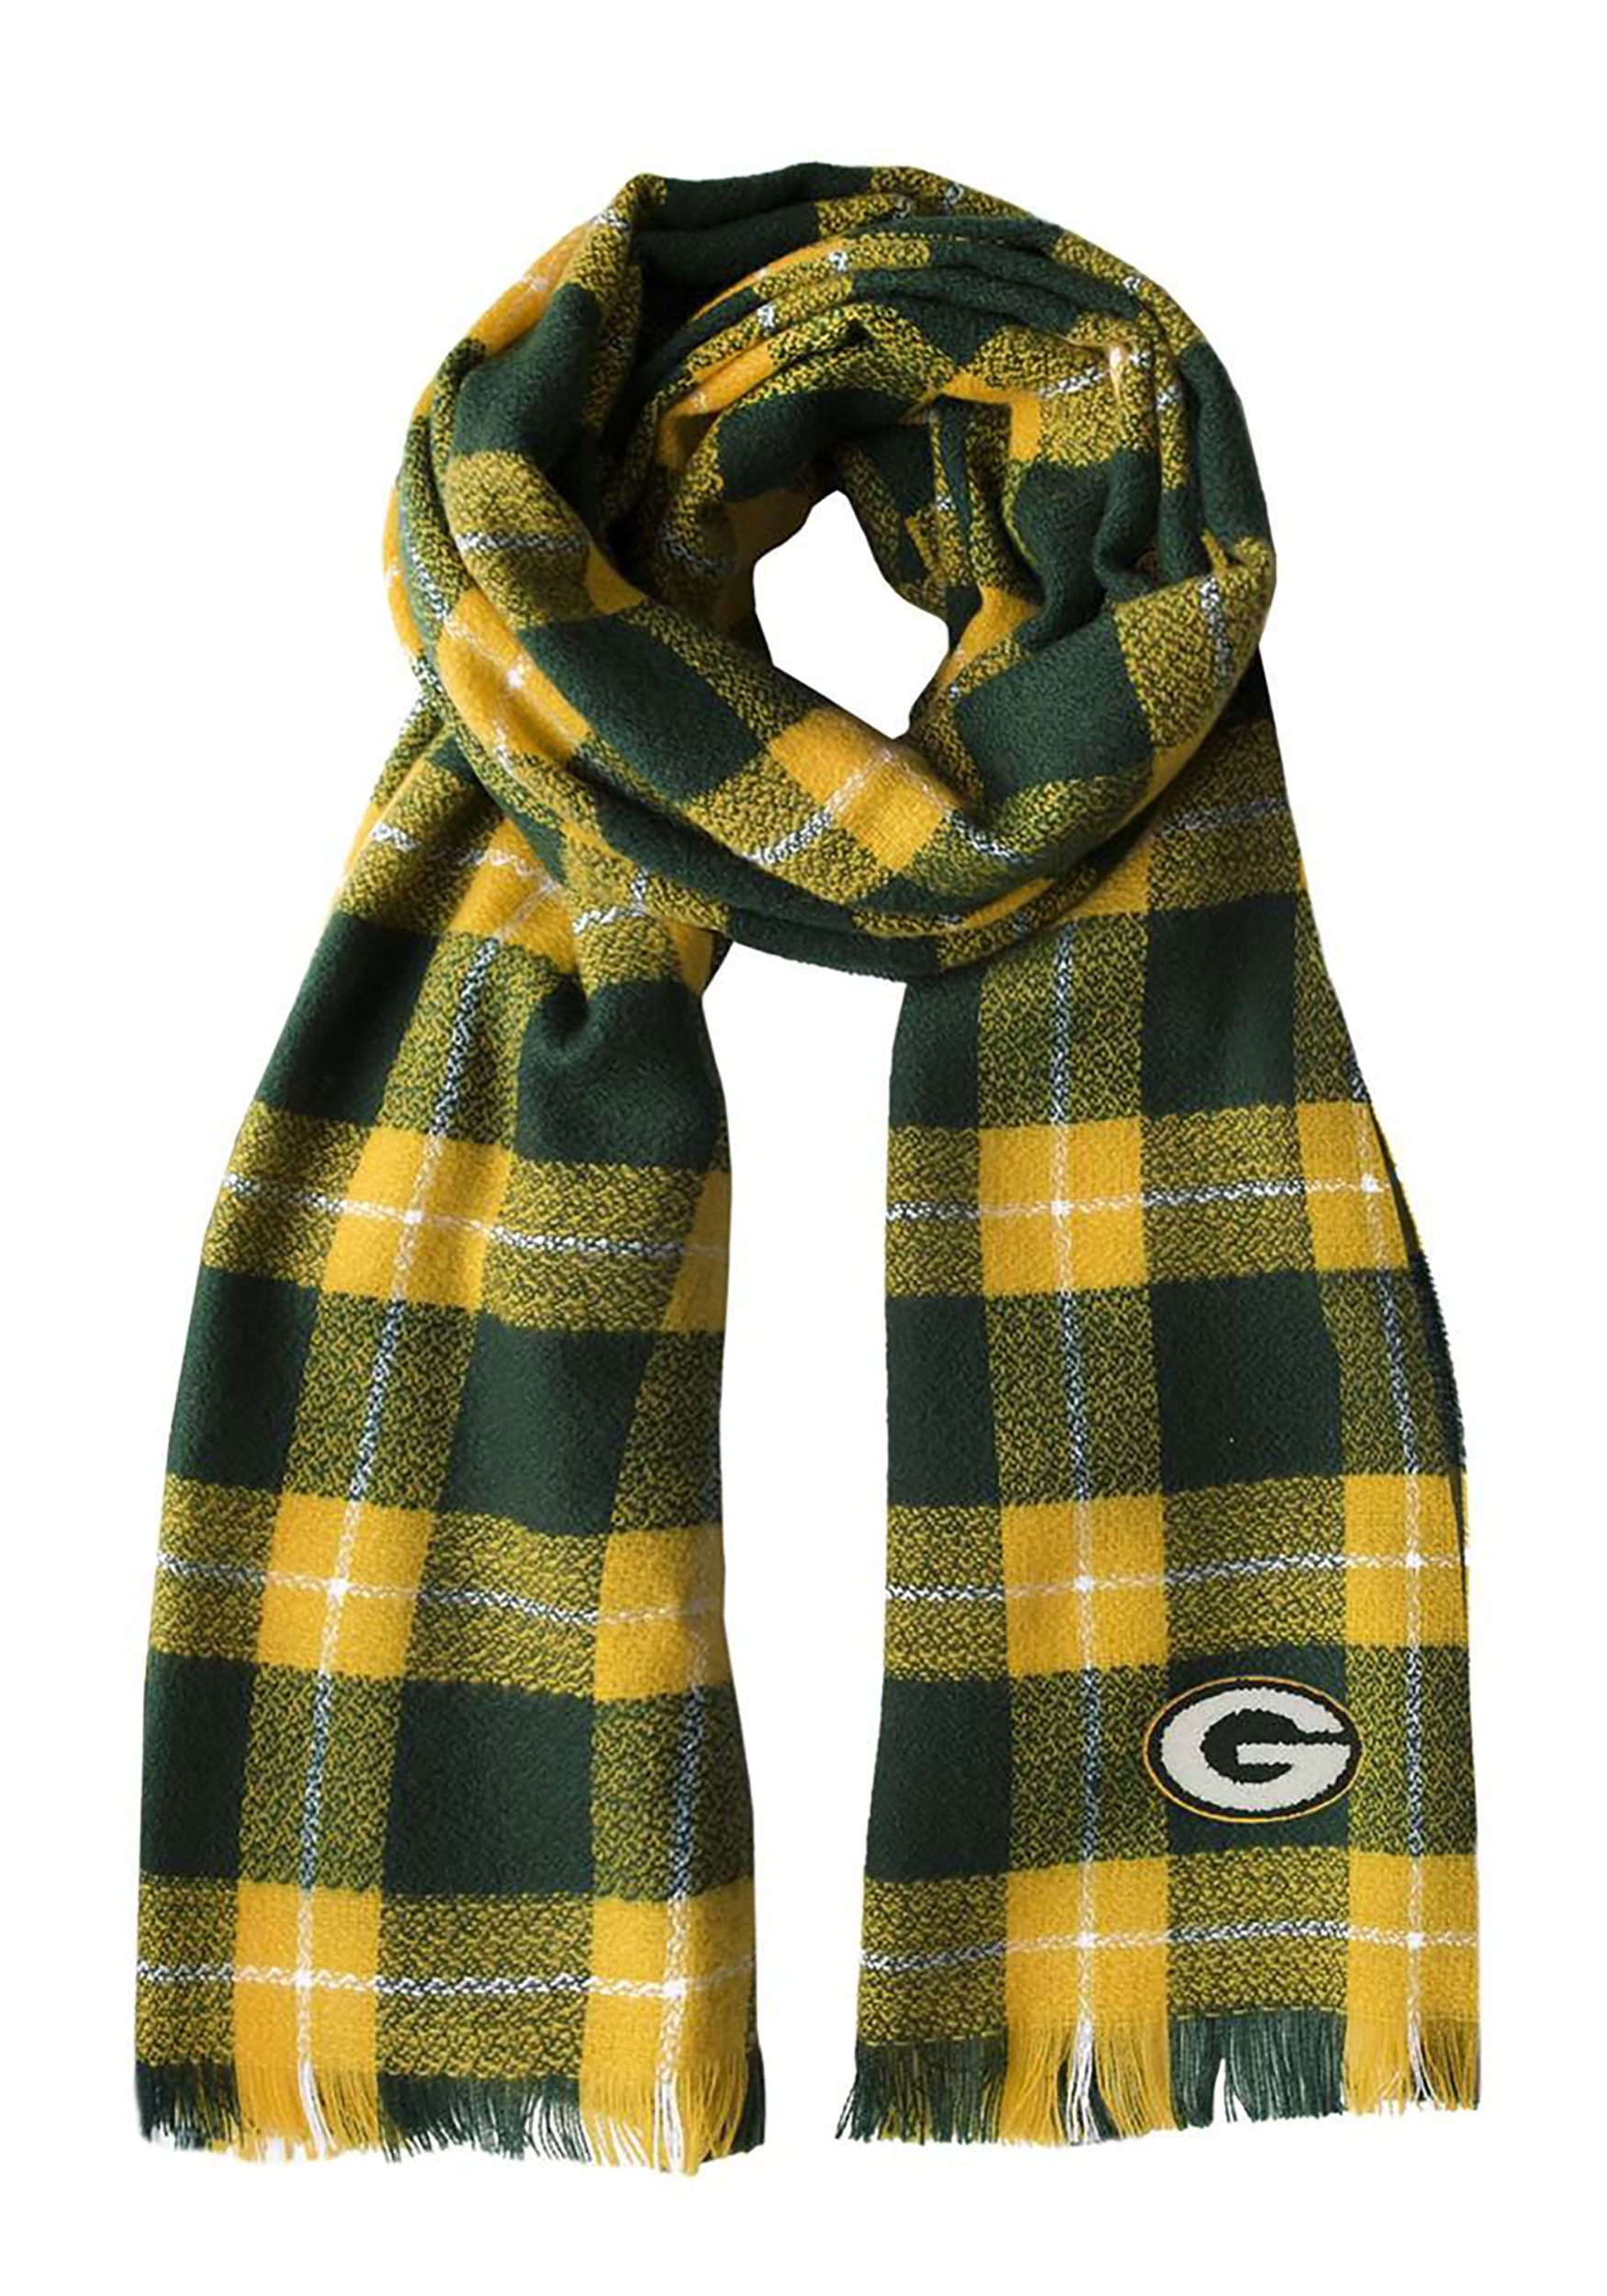 Comfy NFL Green Bay Packers Plaid Blanket Scarf